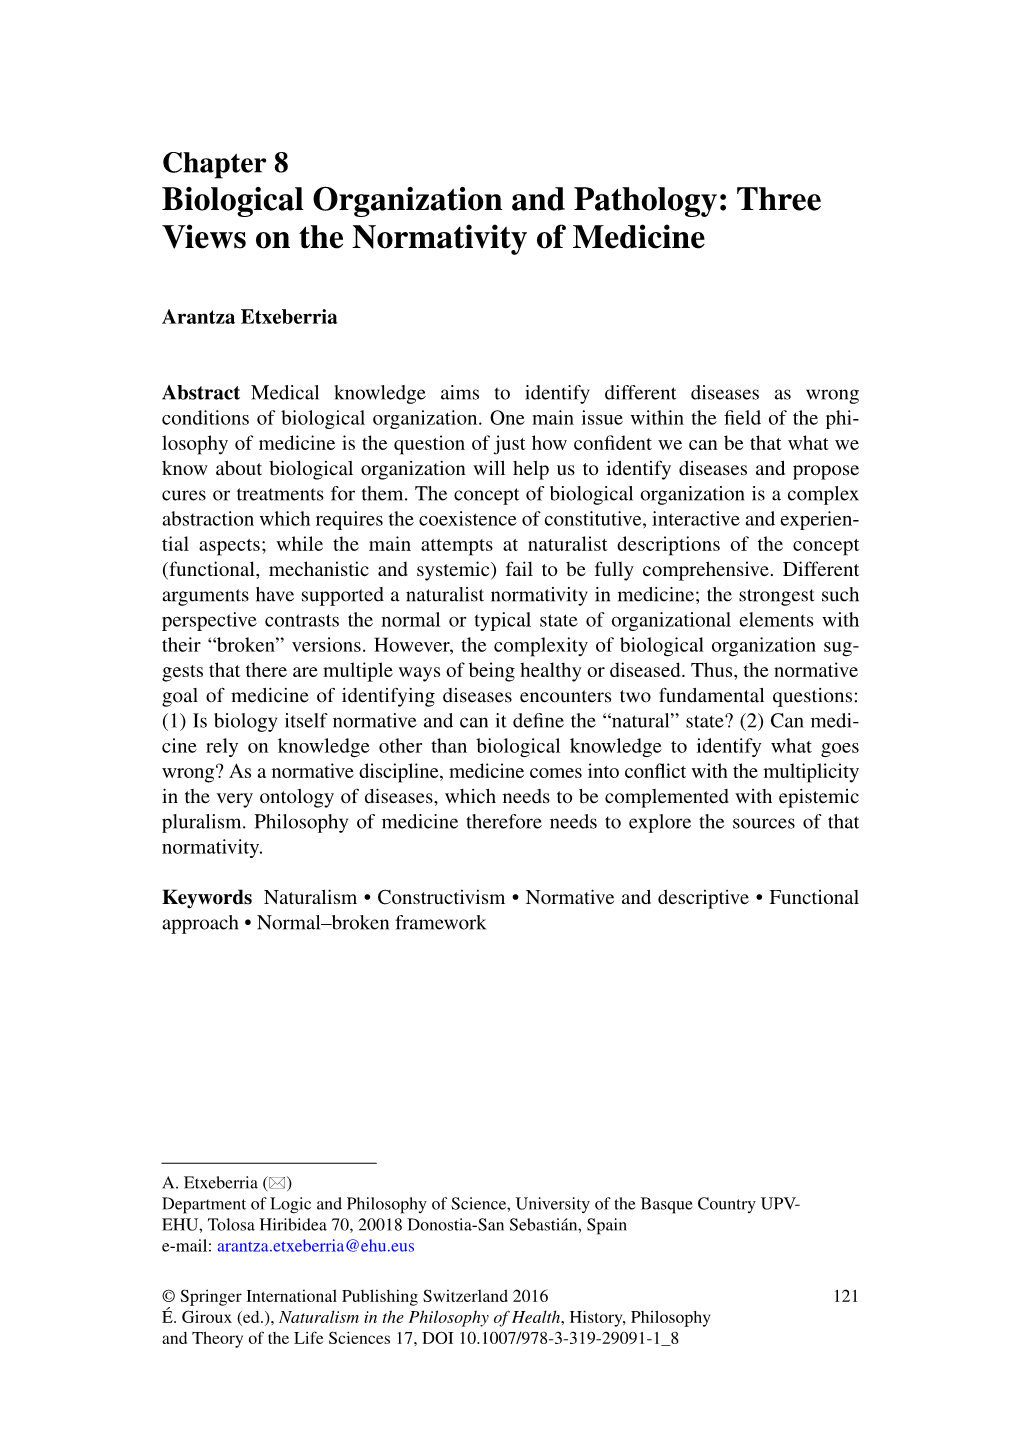 Biological Organization and Pathology: Three Views on the Normativity of Medicine